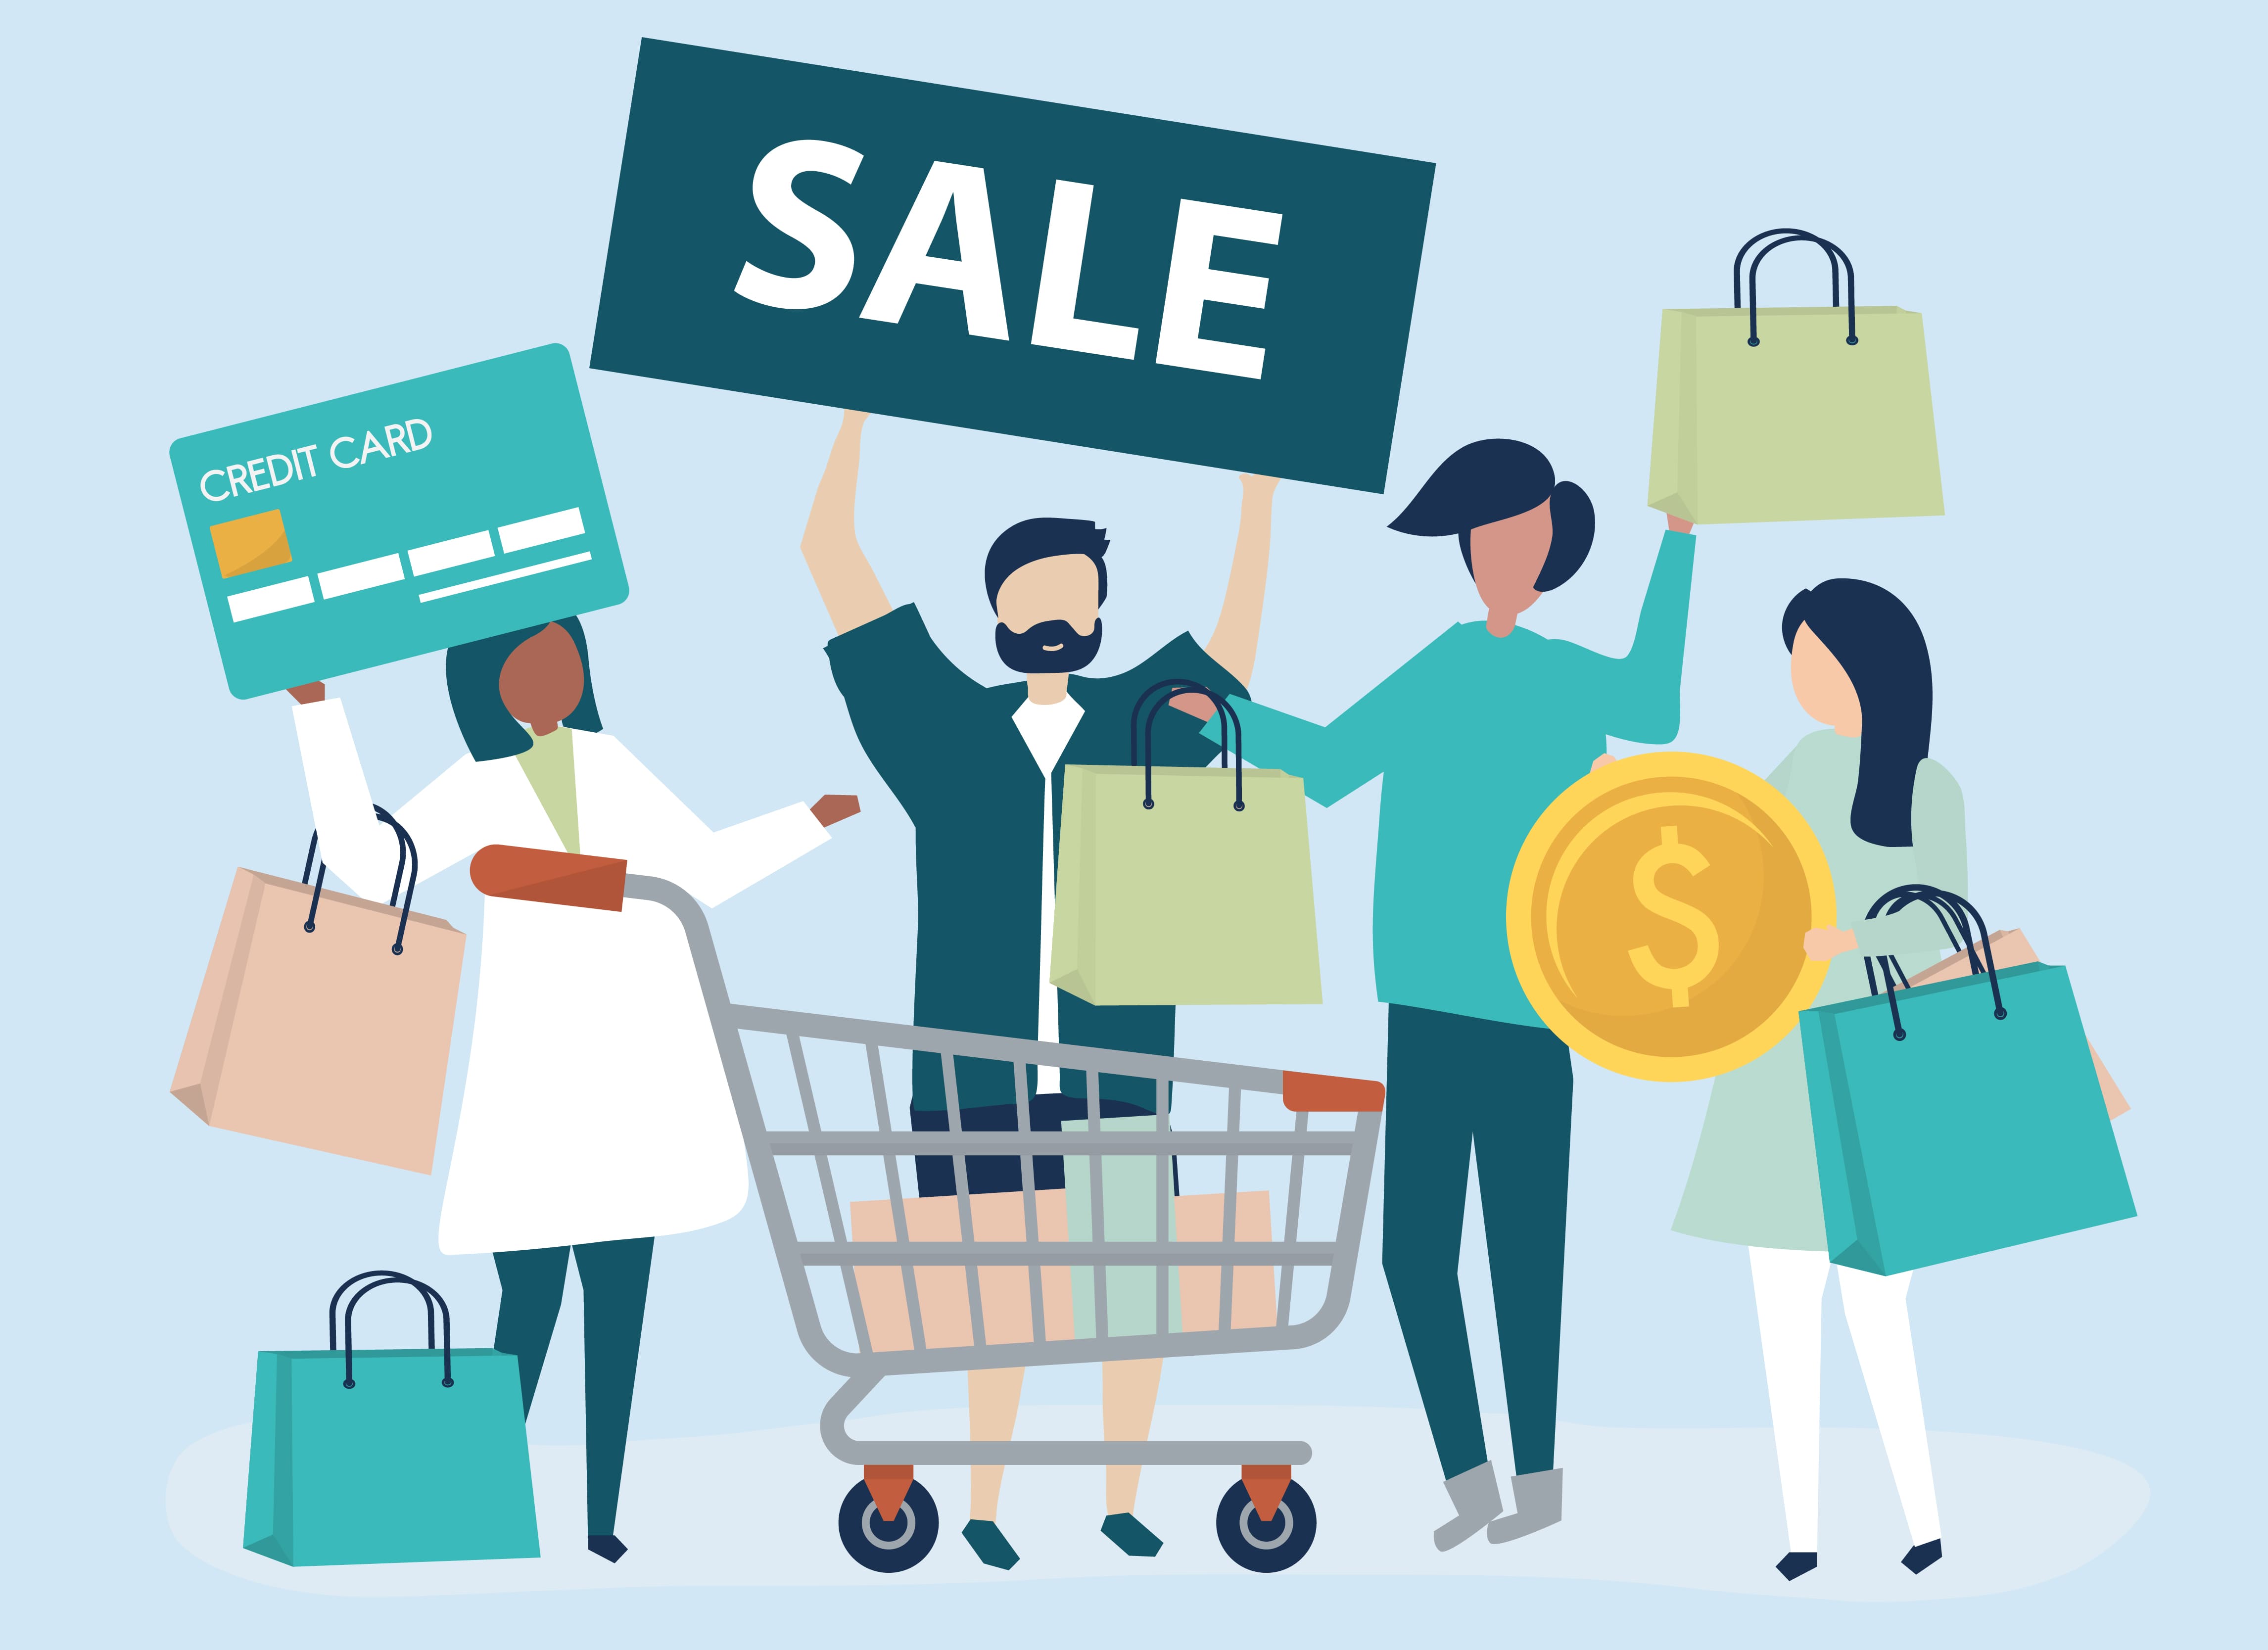 UBC_Festive Sales: How to Encourage the Buying Power of Your Customers